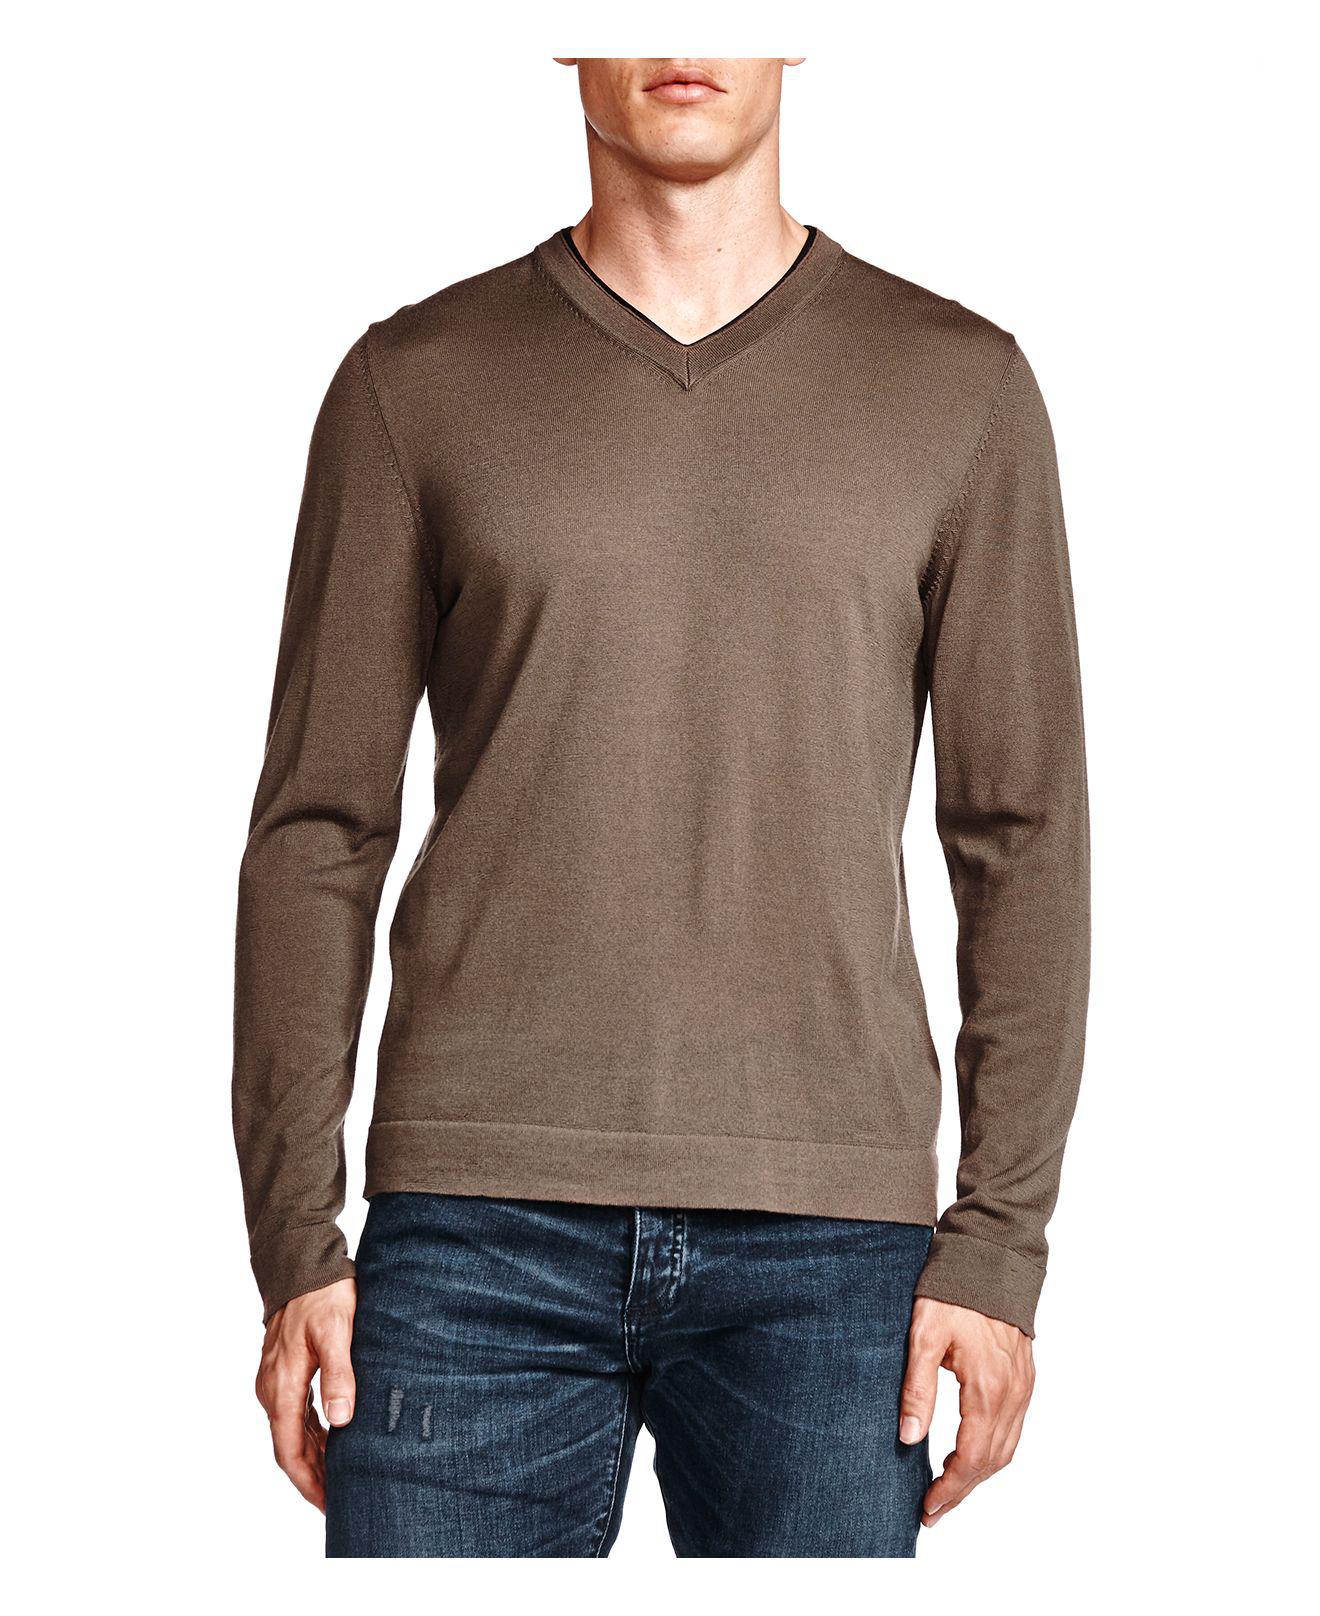 The Kooples Leather Trim Merino Wool V-neck Sweater in Brown for Men - Lyst